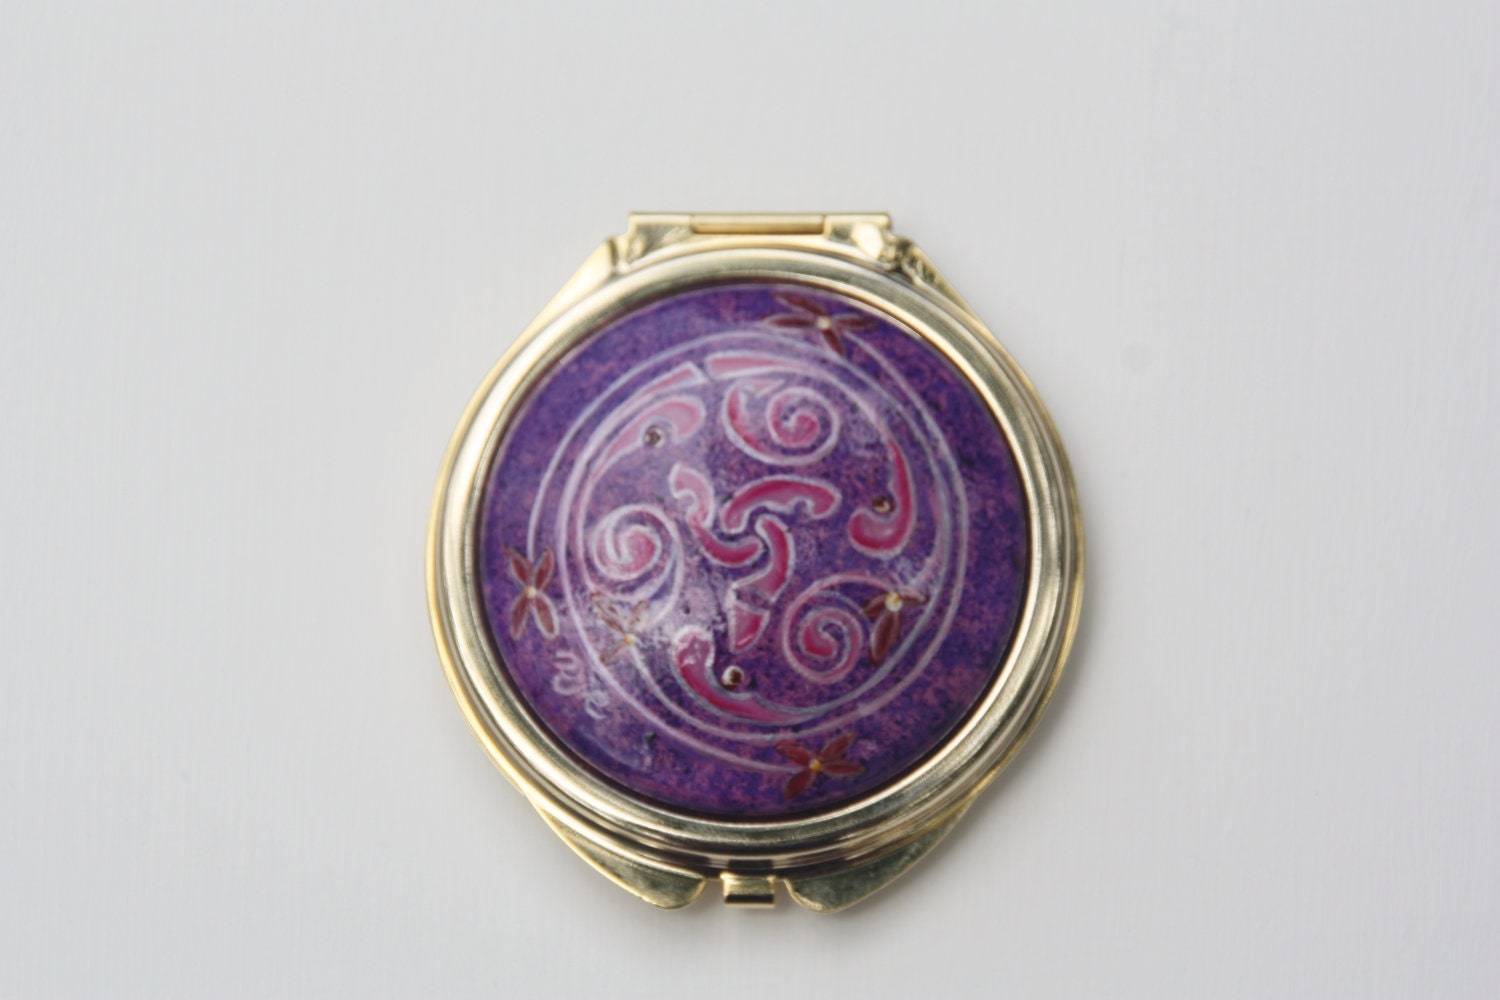 Compact Mirror Acrylic Painting - "Pink Celtic Swirl" - Useable Art by Deb Ritchie - WildEthereal